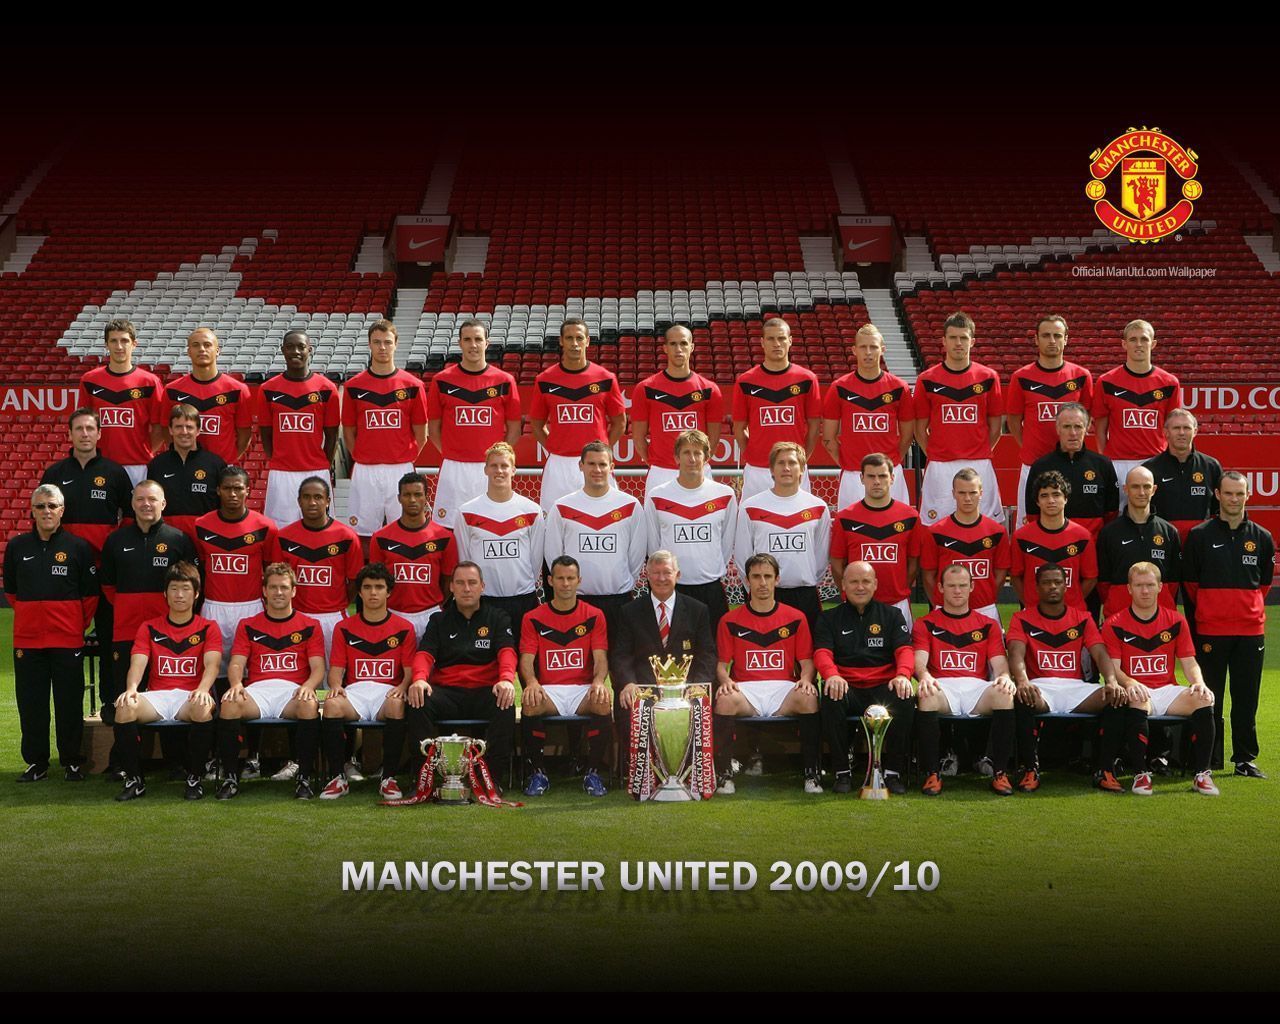 The Manchester United squad of 2009-10 (Image via Manchester United)